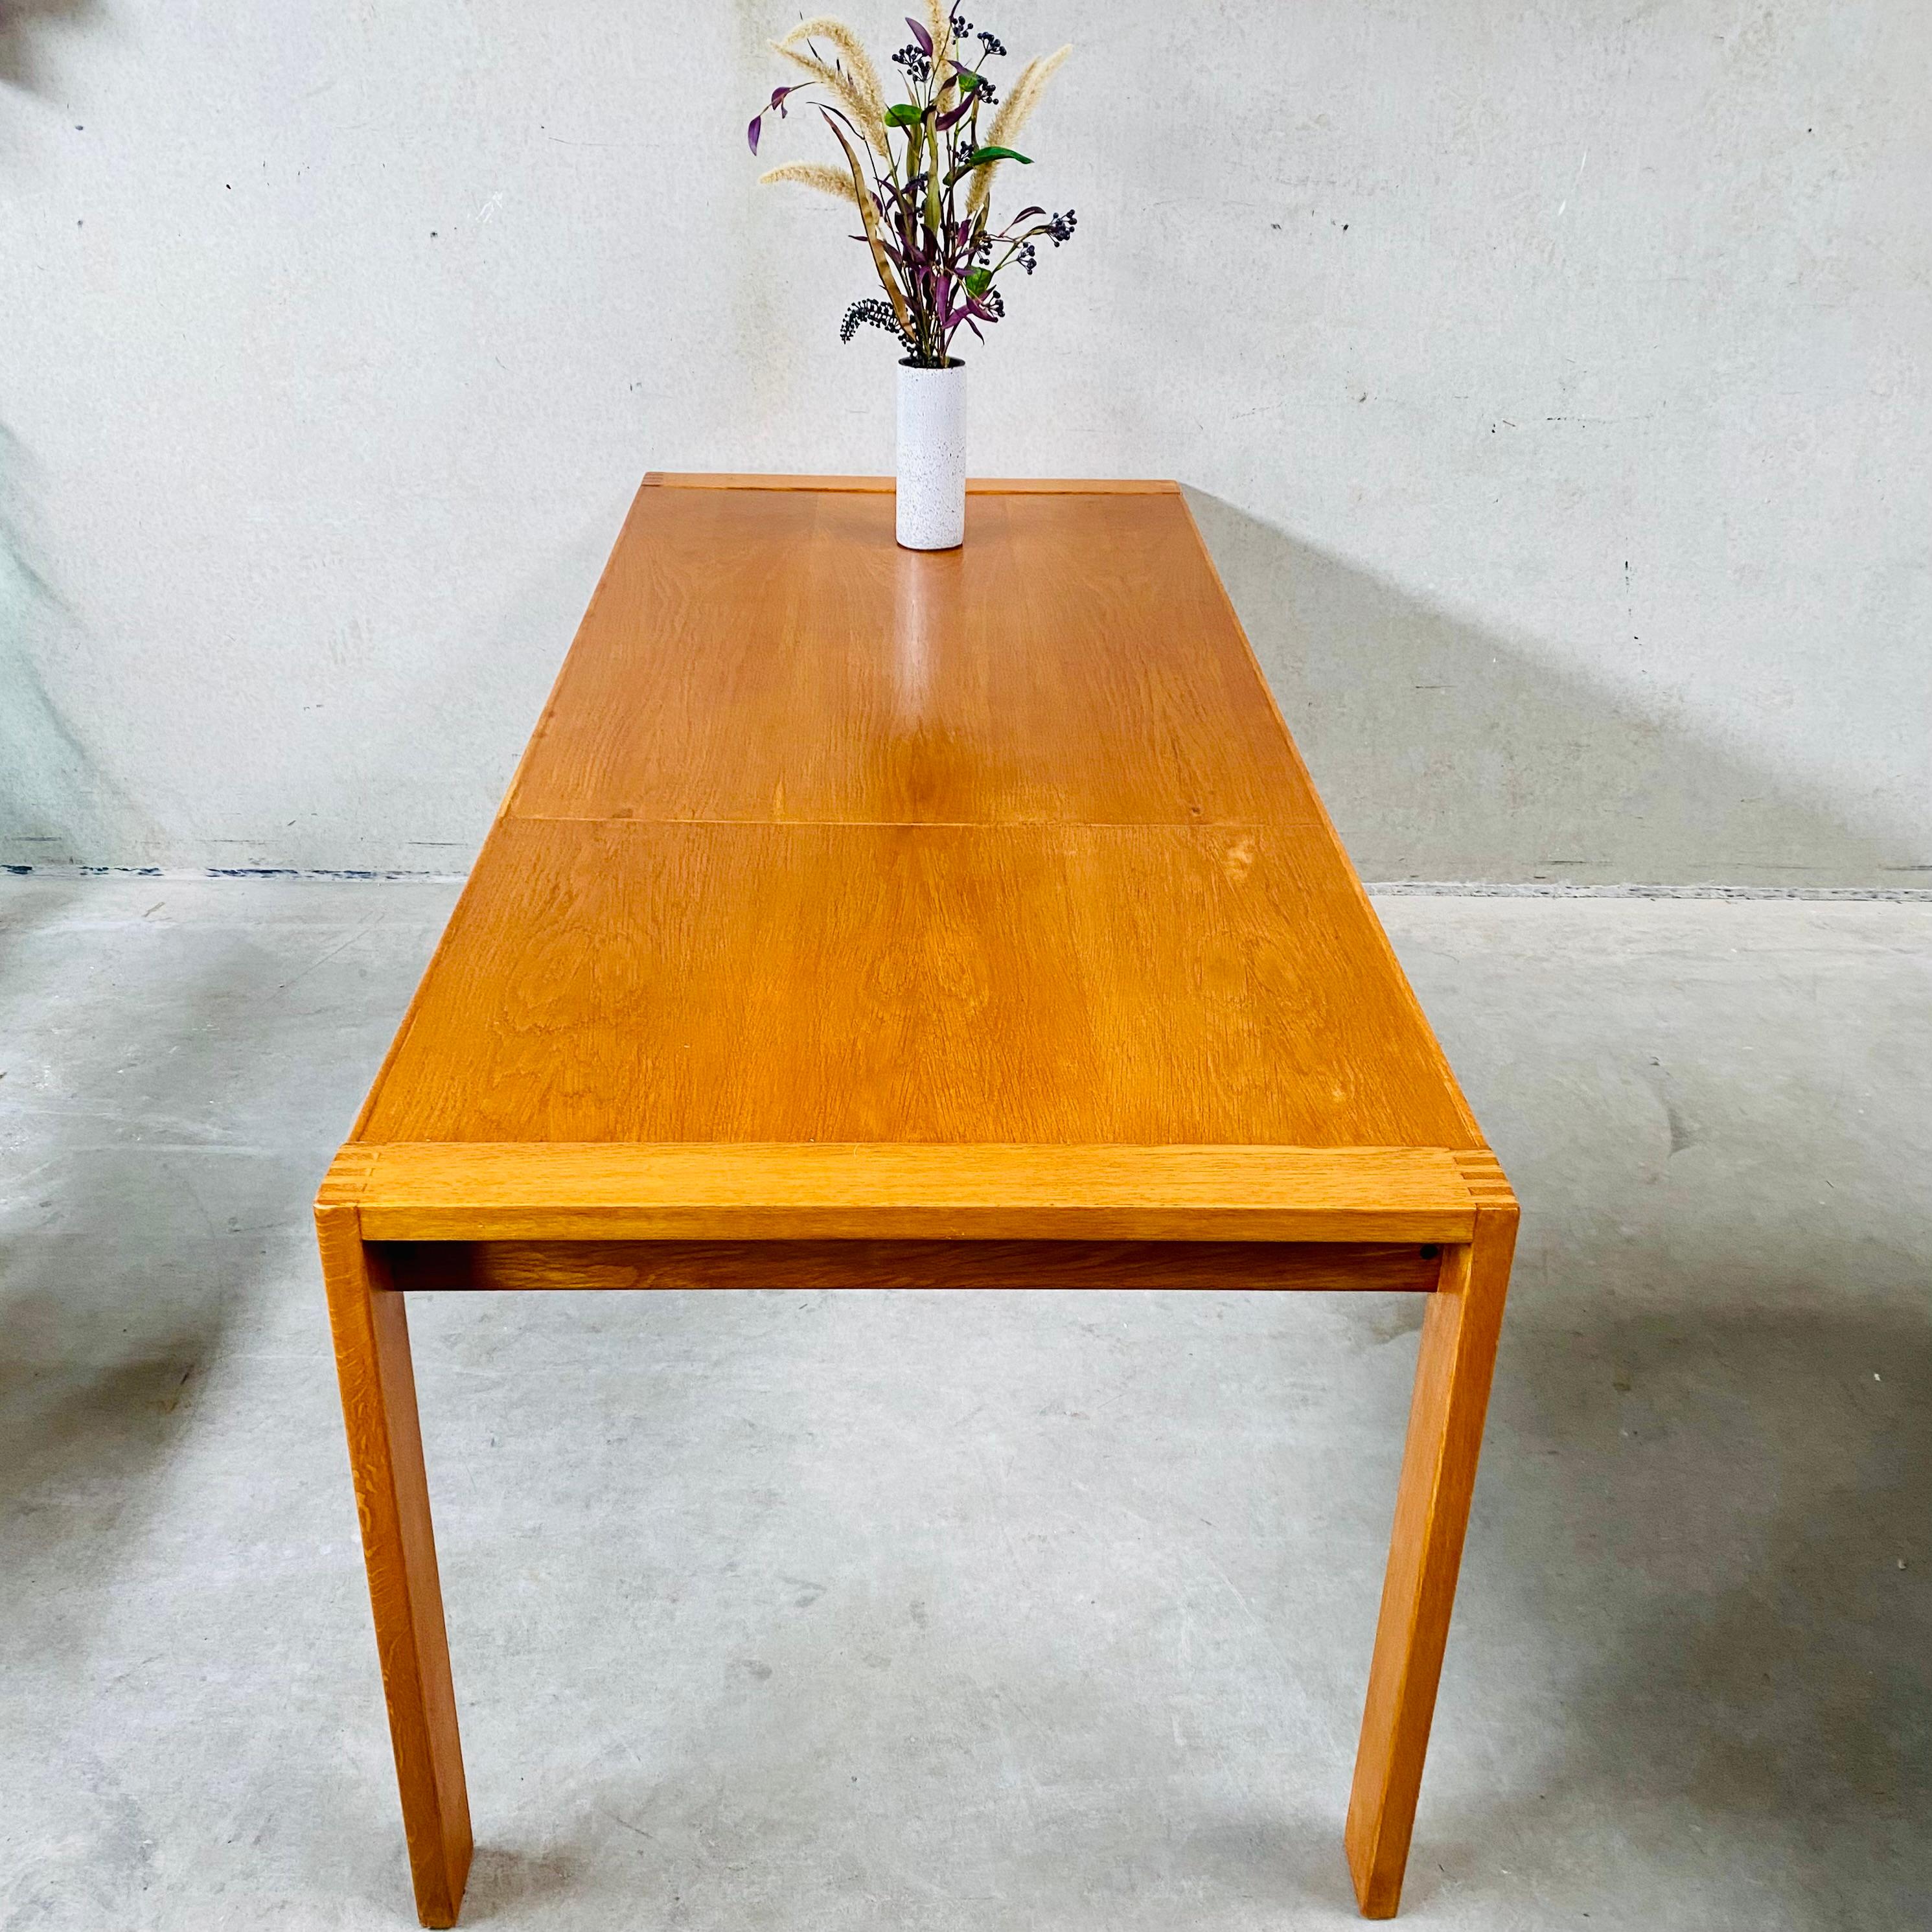 Looking for a stunning piece of midcentury Dutch design that combines sleek lines, functionality, and style? Look no further than the Oak Model SE15 Extendable Dining Table by Pierre Mazairac & Charles Boonzaaijer for Pastoe, 1976.

Crafted with